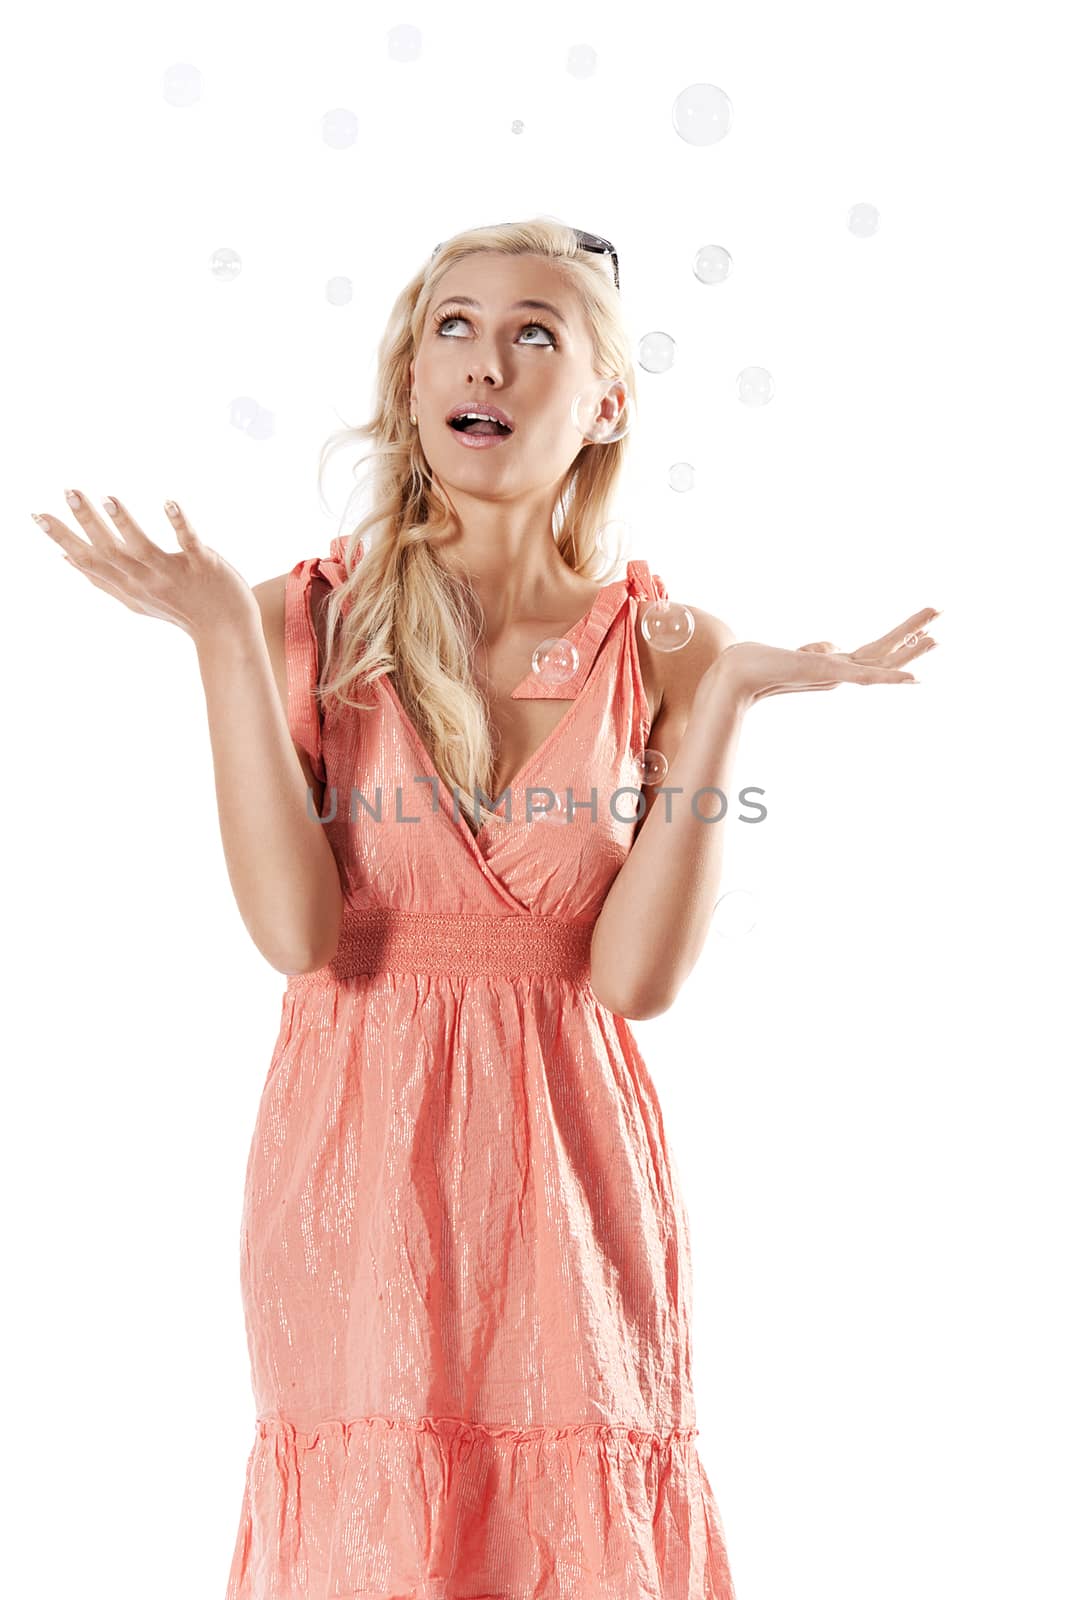 pretty young blond woman wearing a summer orange dress standing against white background looking towards the soap bubbles